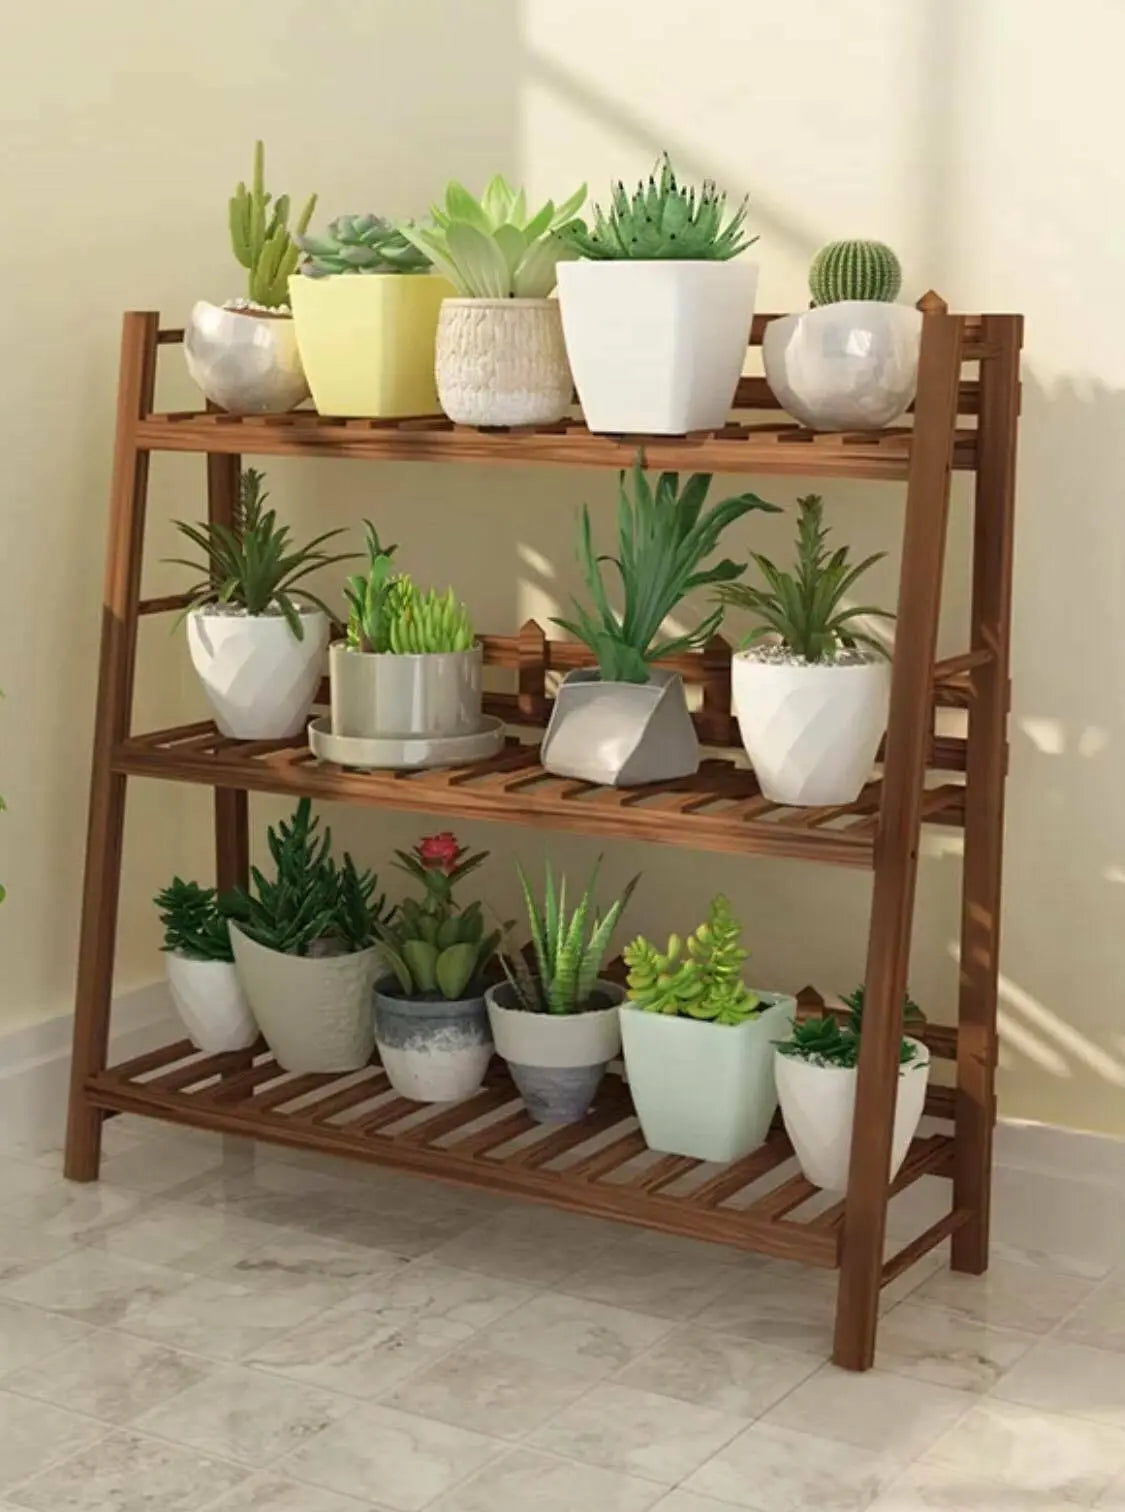 WOODEN SHELF PLANT STAND FOLDABLE MULTI TIERS INDOOR OUTDOOR GARDEN PLANTER everythingbamboo